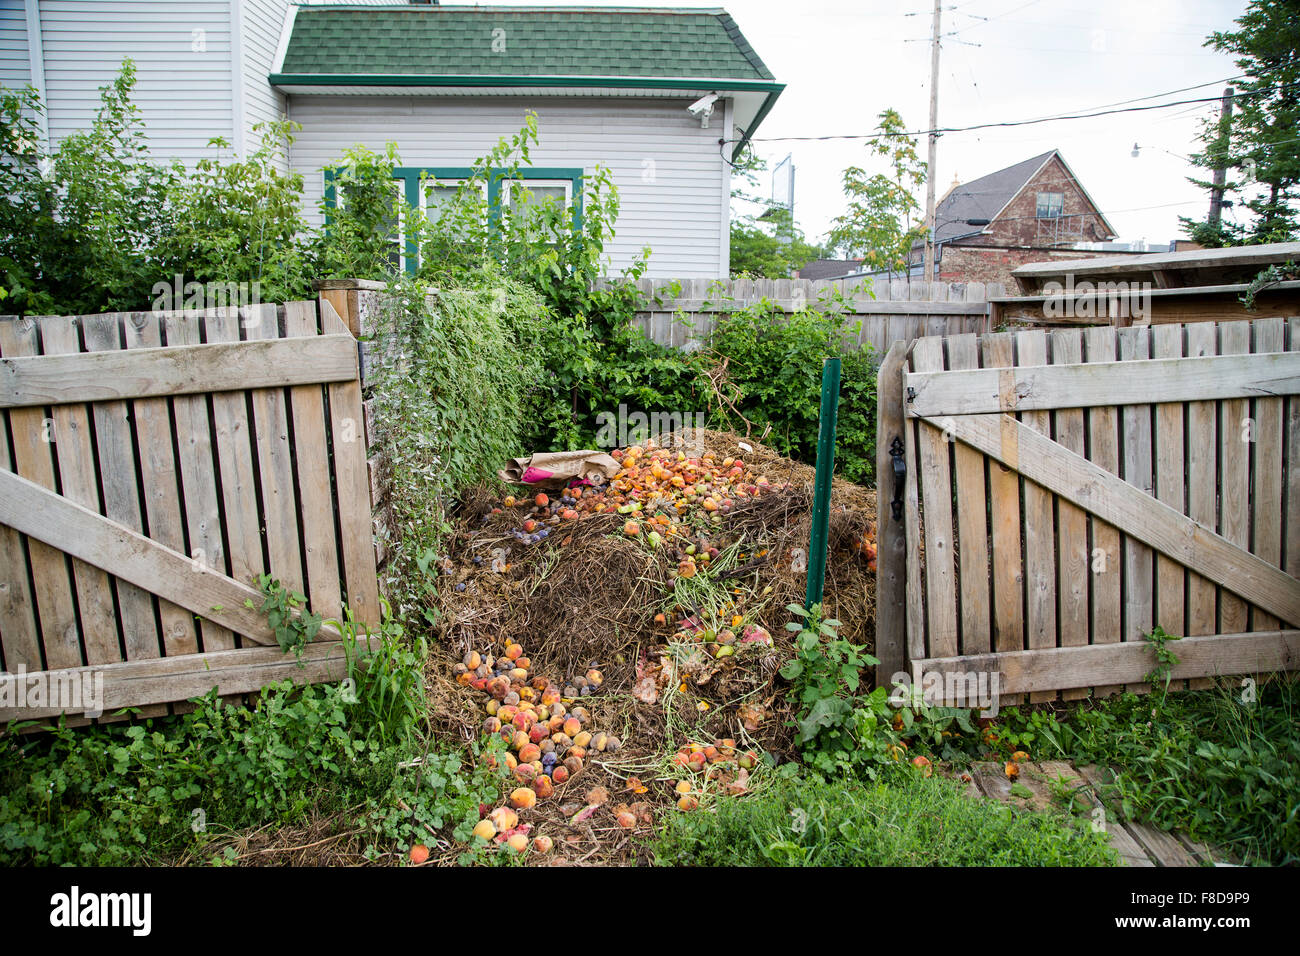 An Active Community Compost Pile Sits In The Backyard Of An Urban